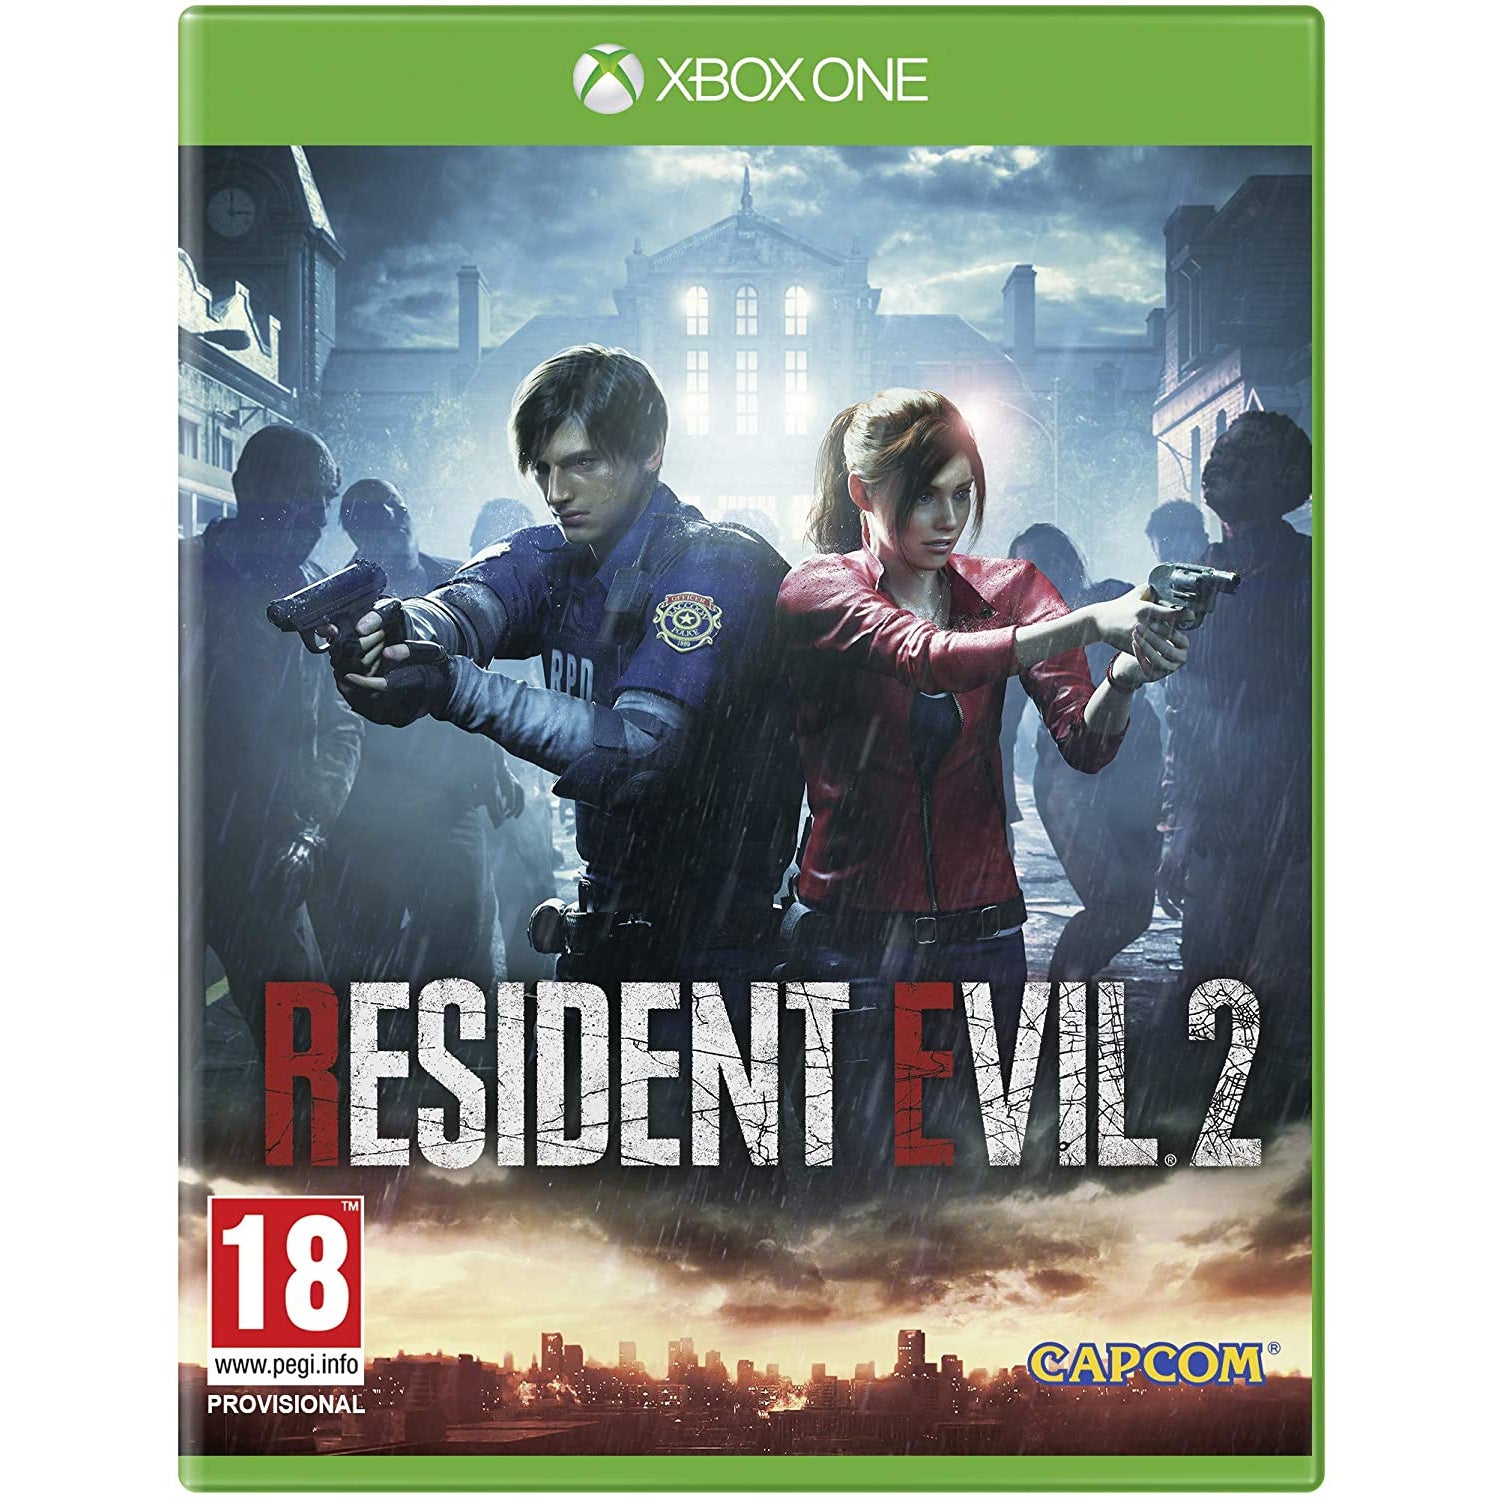 Resident Evil 2 (Xbox One) - Disc Only